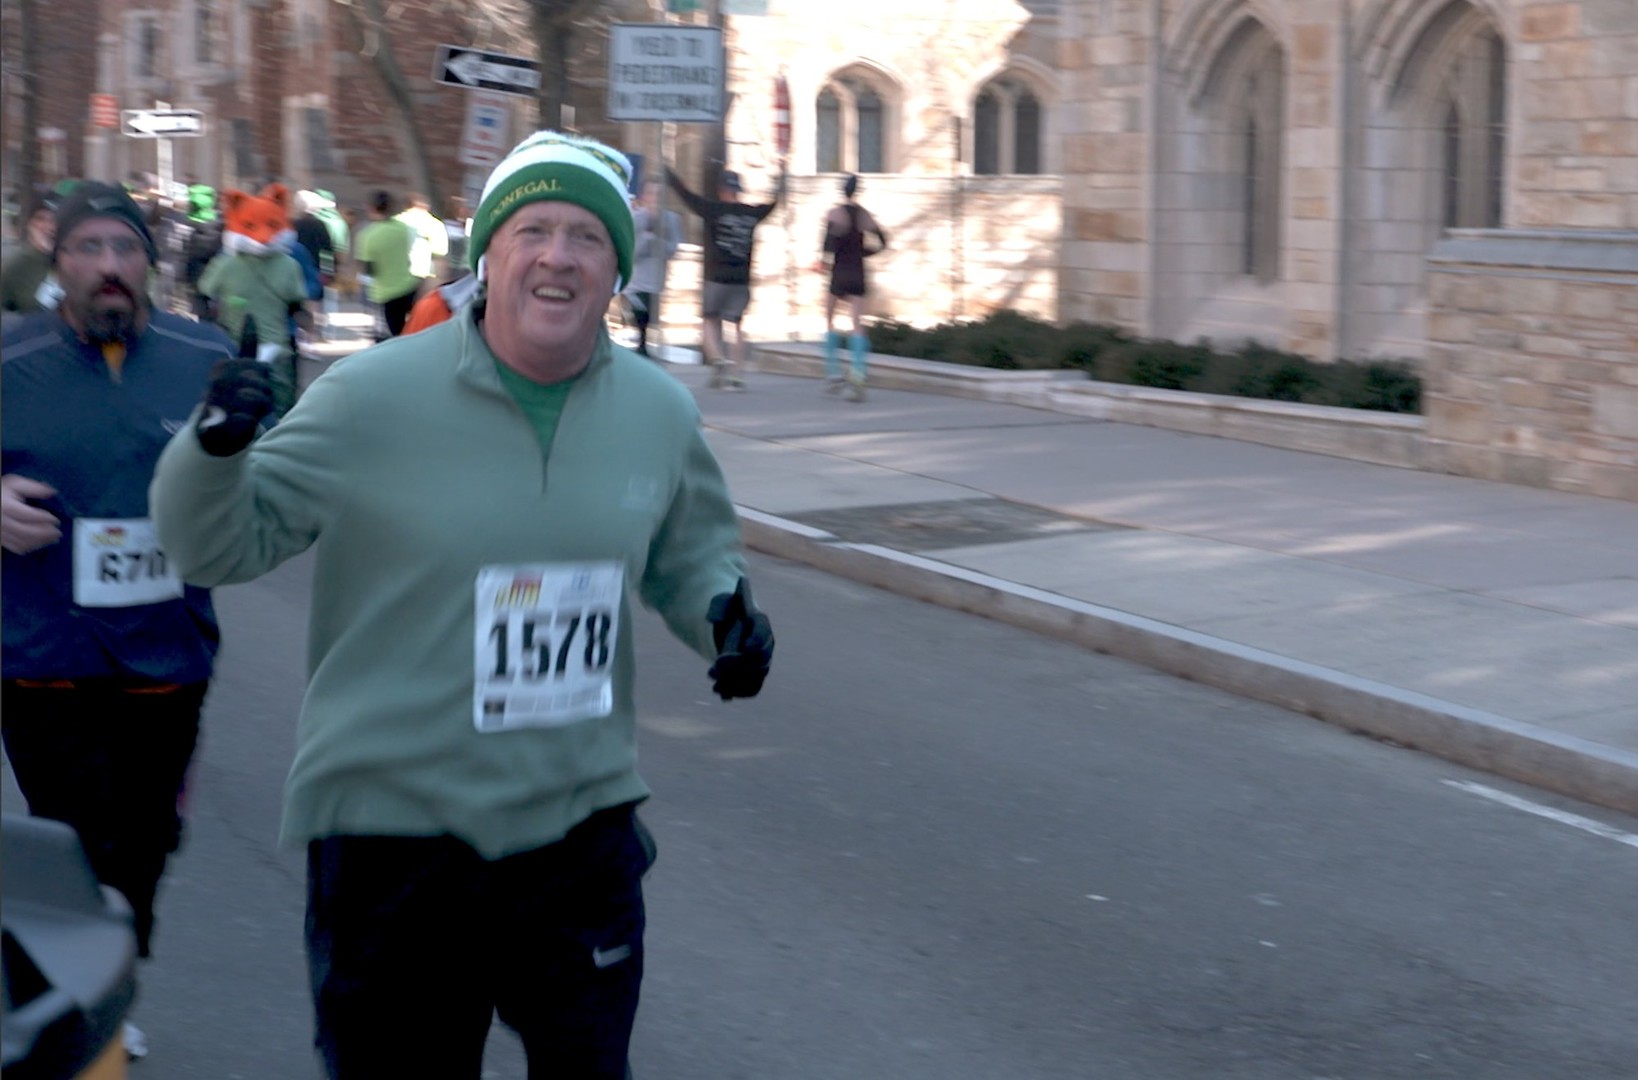 BWP Sponsors Shamrock & Roll 5K race in New Haven, Attorney Buckley Participates